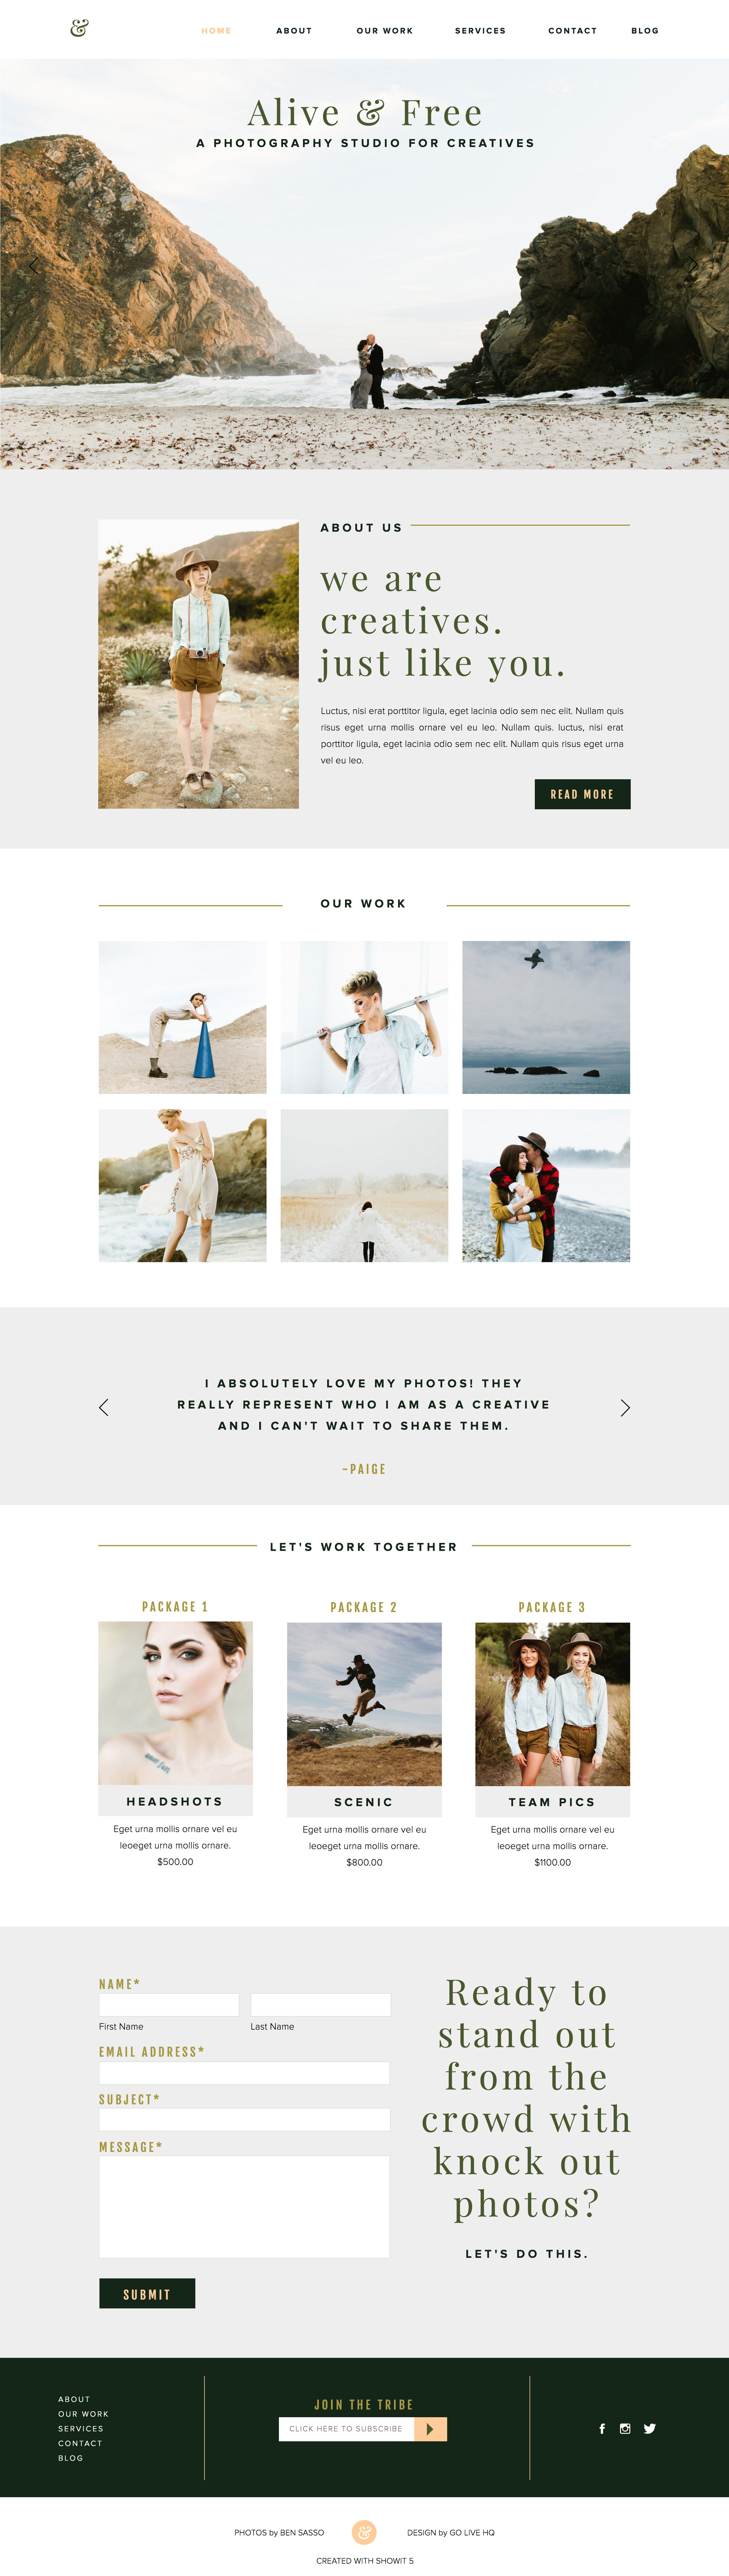 Free Showit Template - Alive & Free